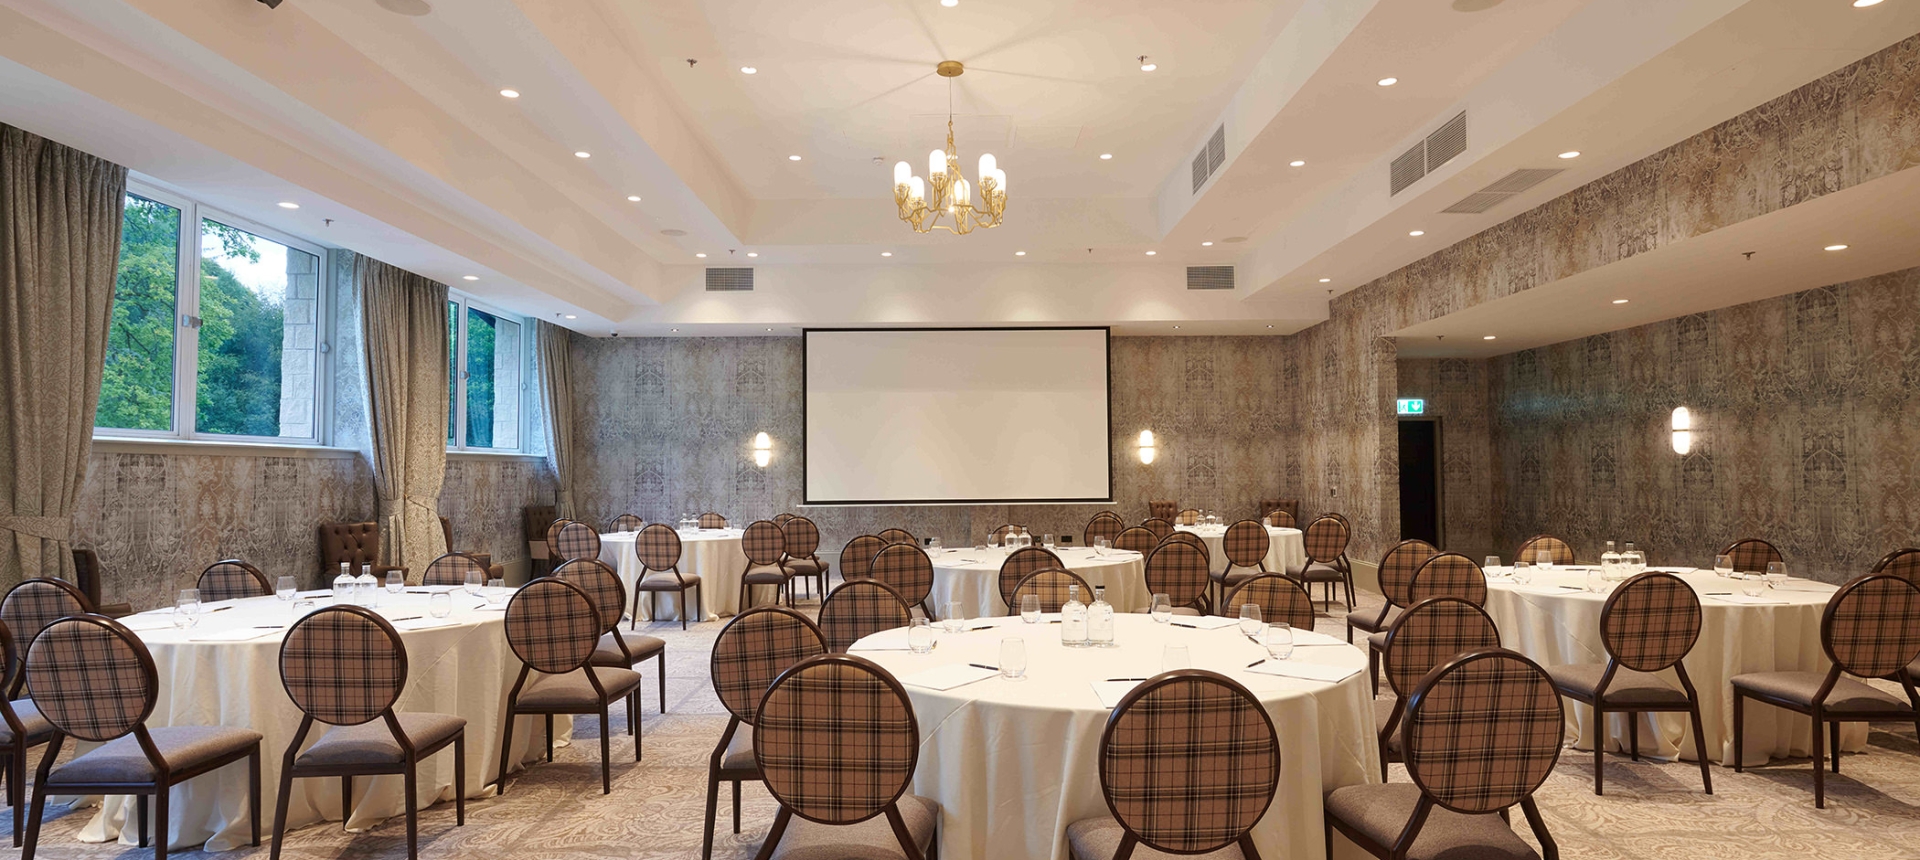 Event space with plenty of tables and seating along with a projector screen and chandelier lighting